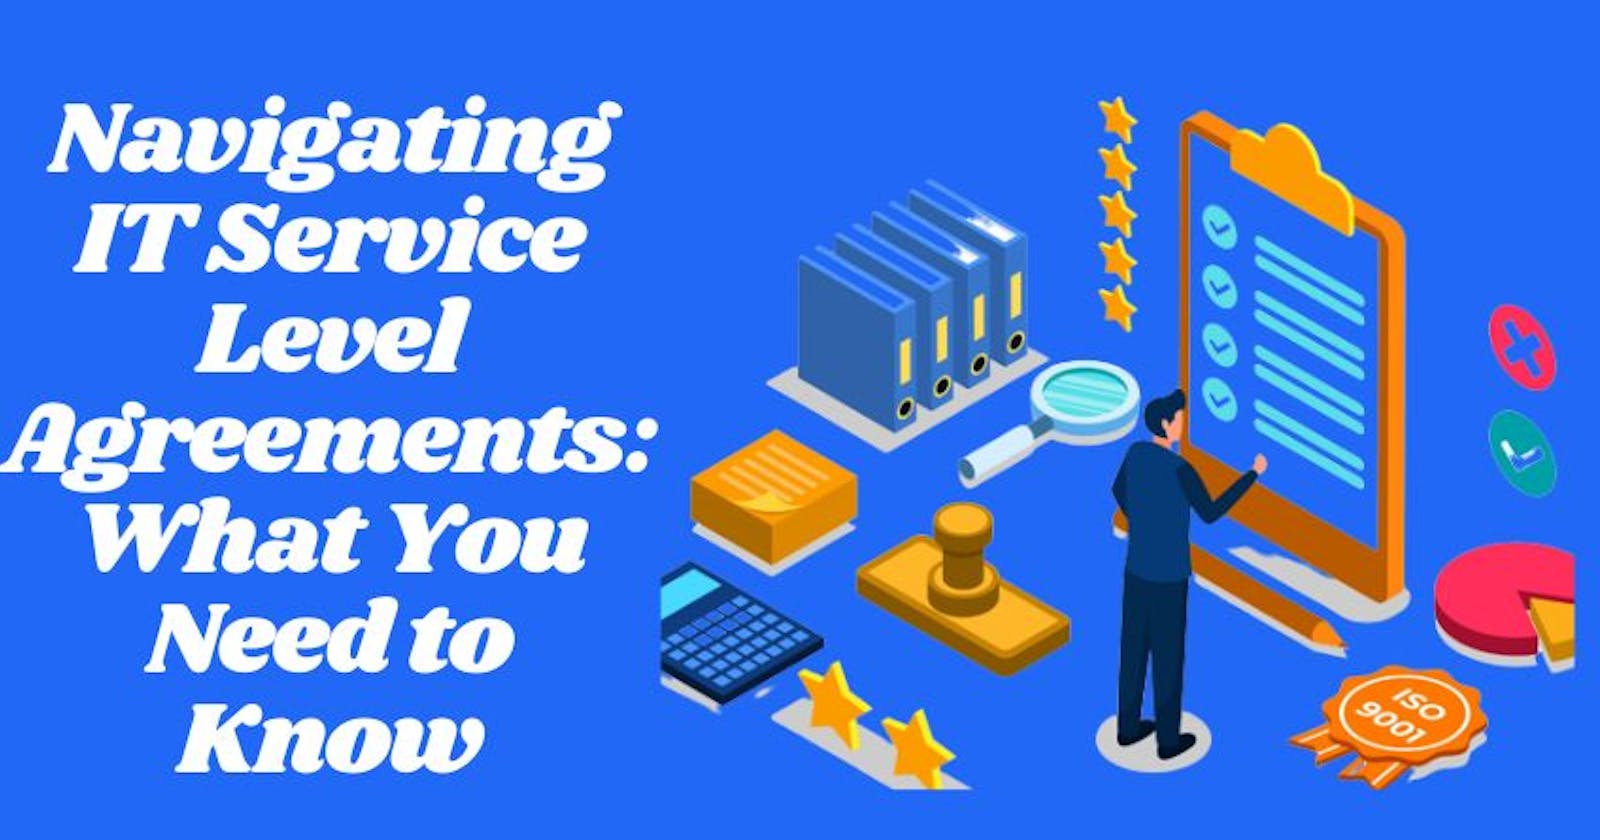 Navigating IT Service Level Agreements: What You Need to Know